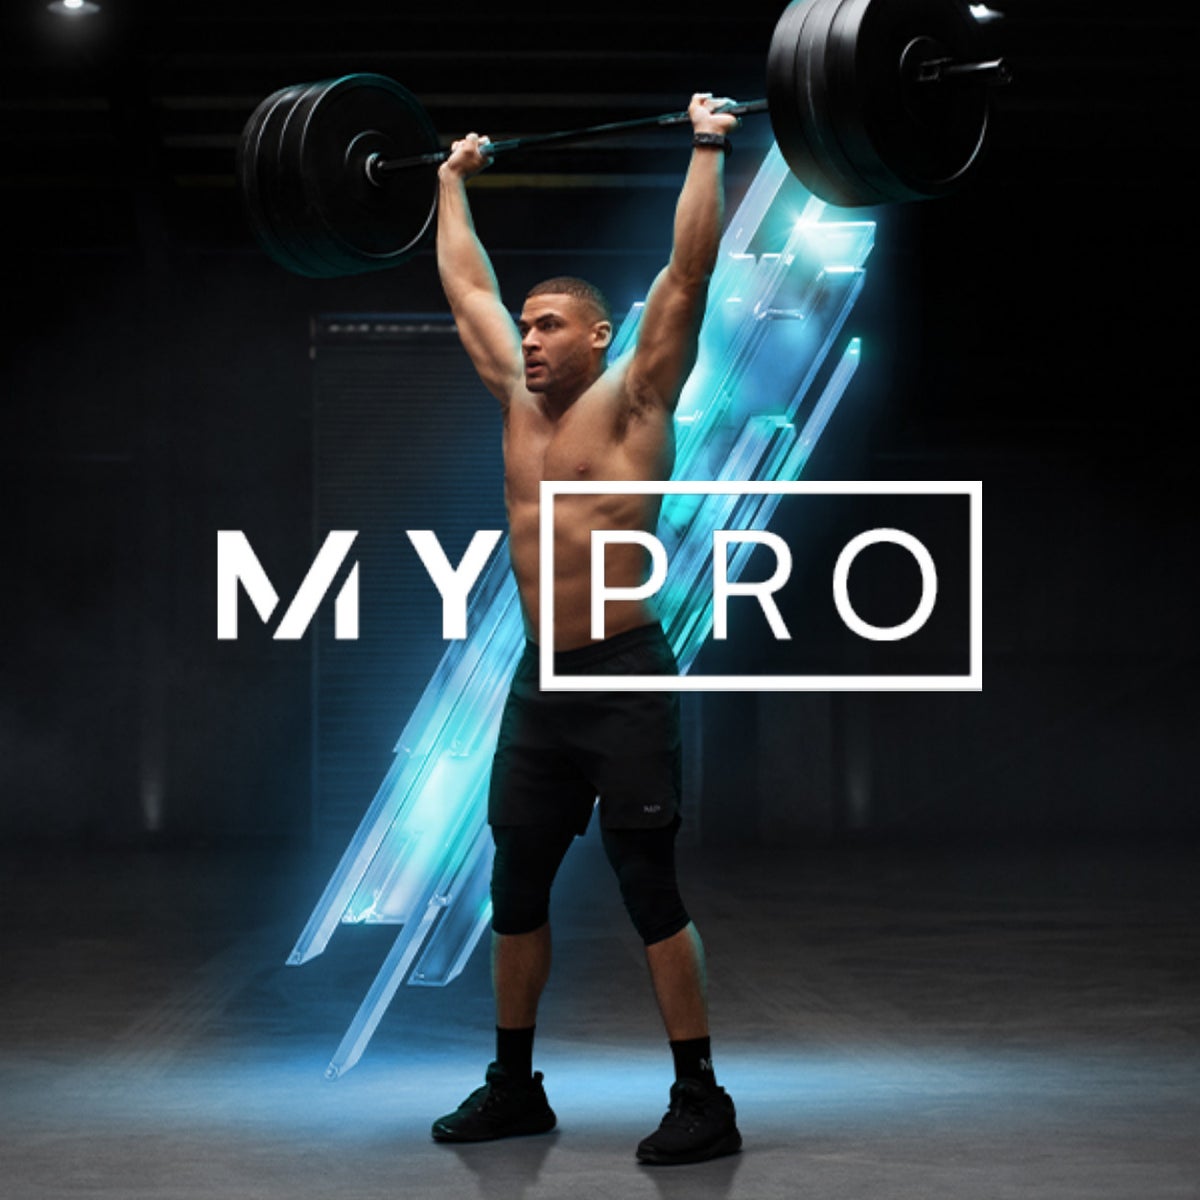 About us. MyPro